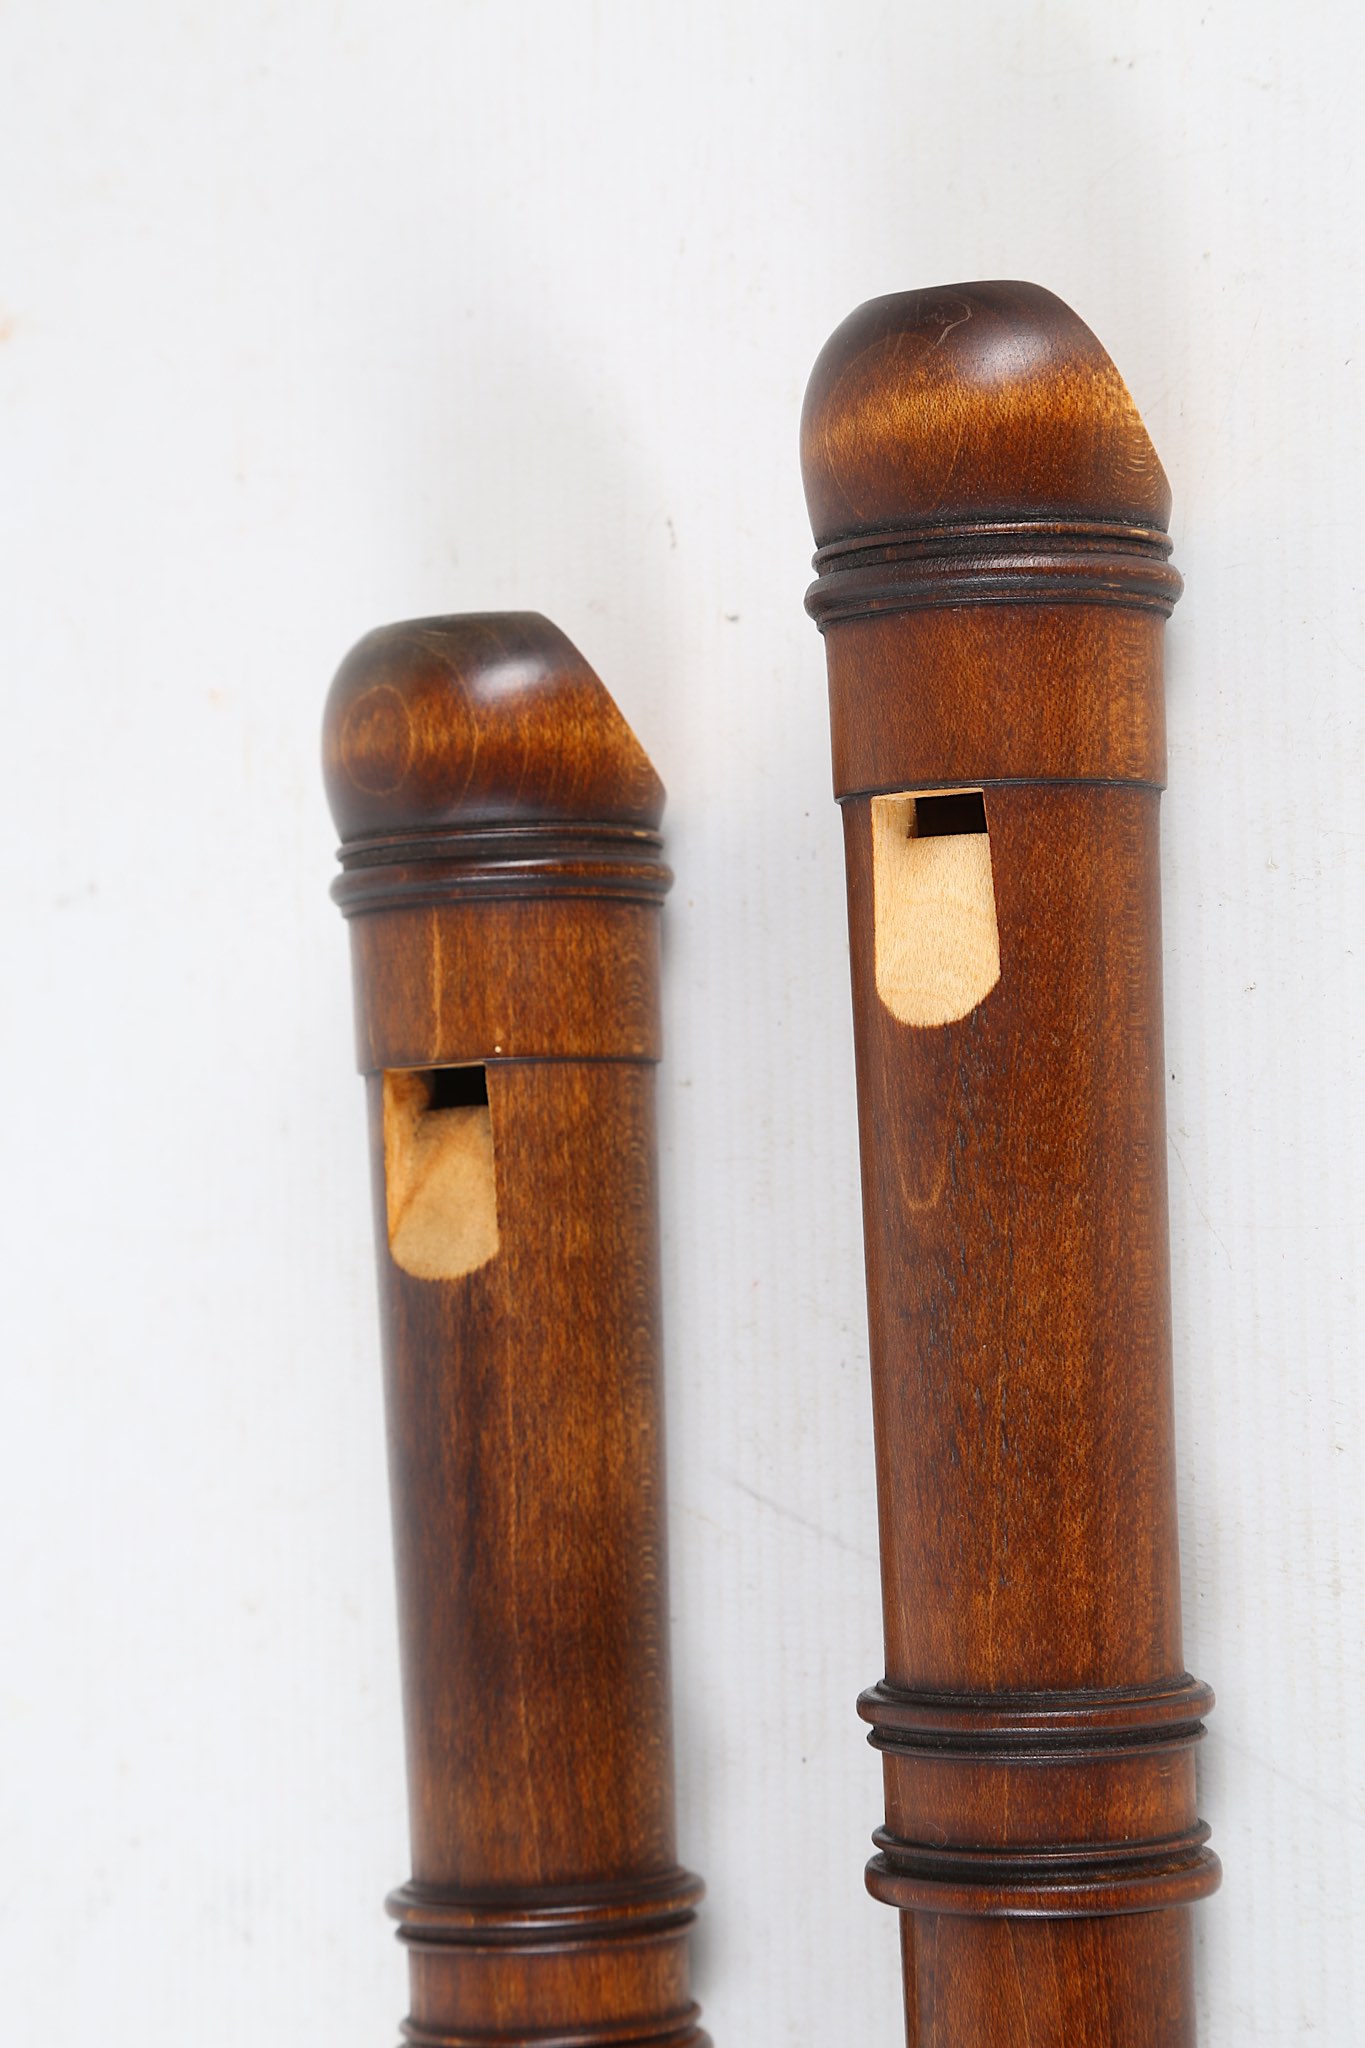 Two Praetorius trebles. Both are made out of maple, stained in brown colour. In very good condition. - Image 3 of 4